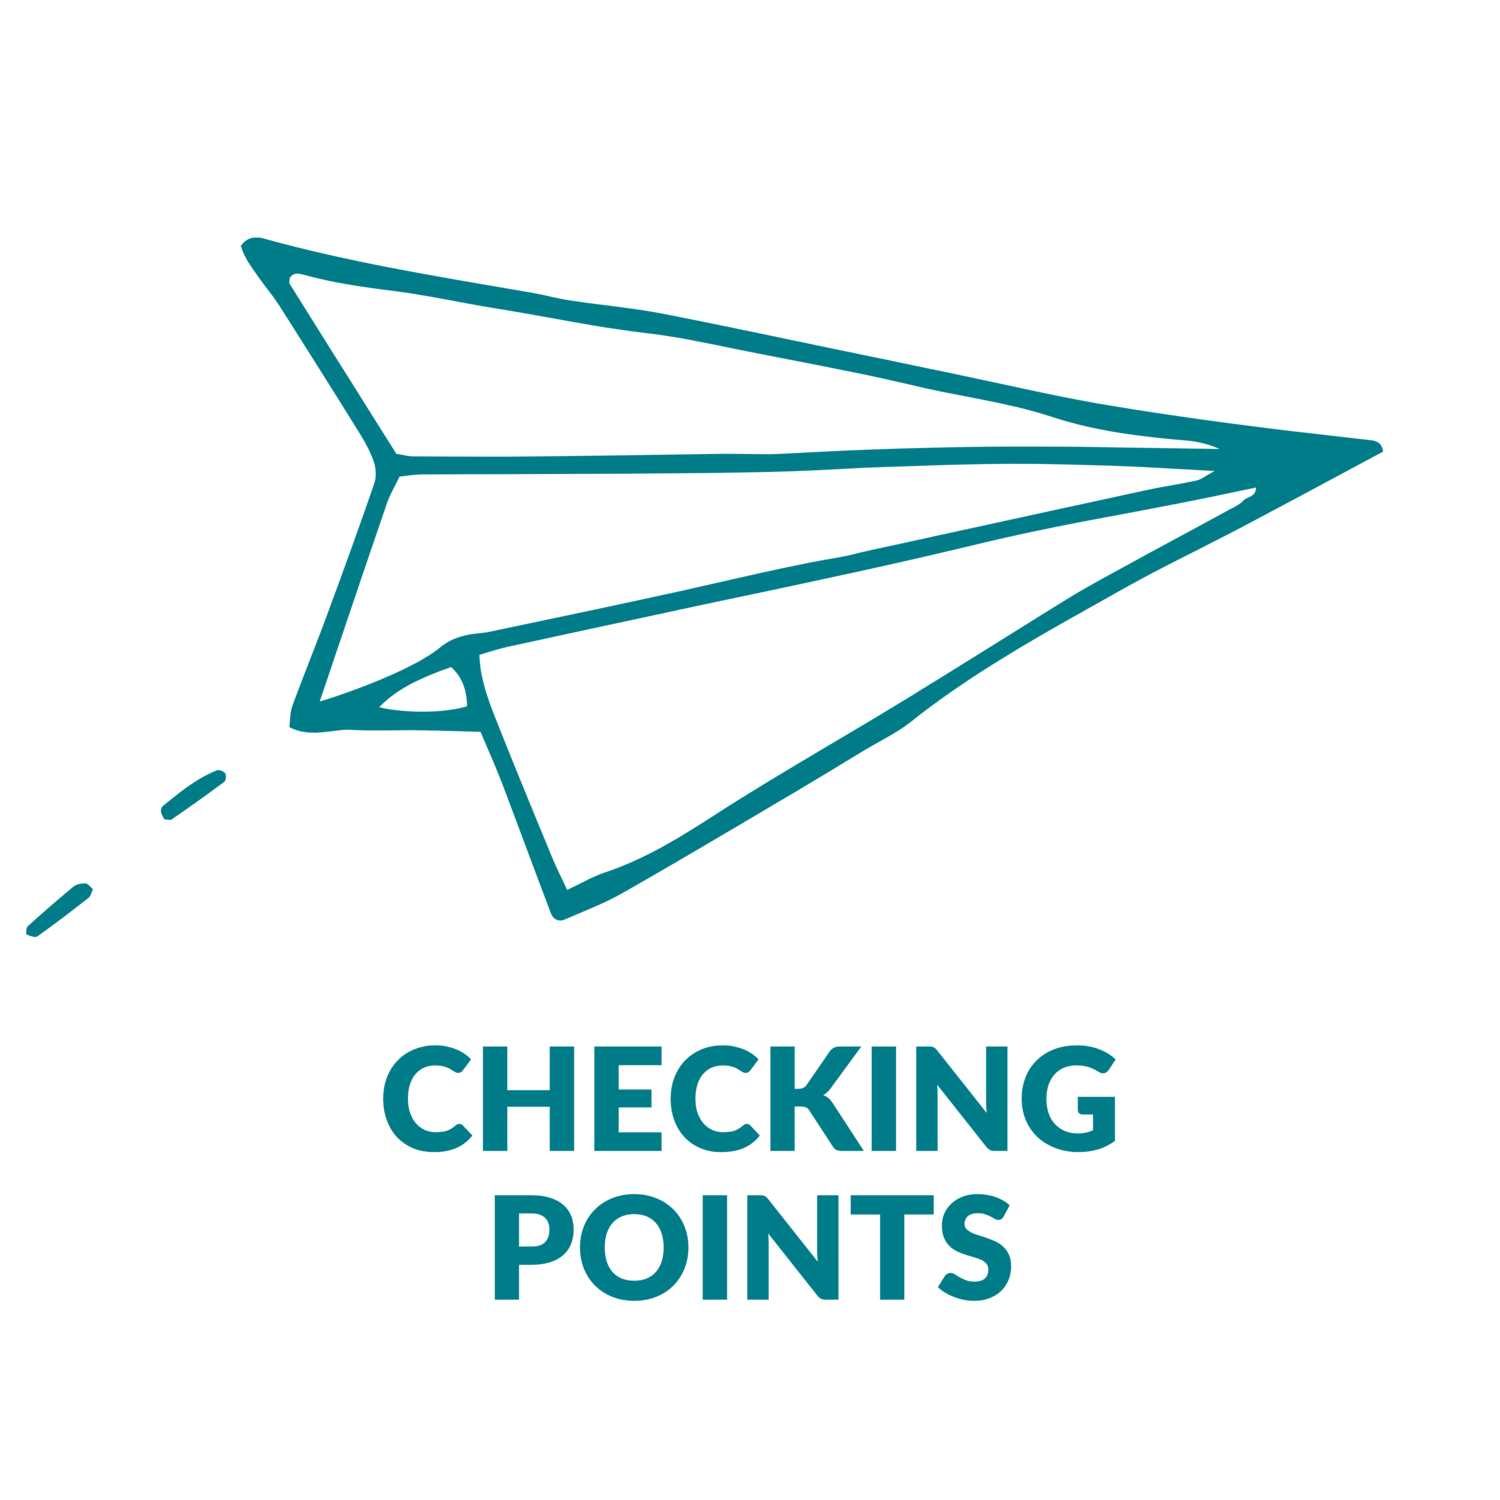 Checking Points